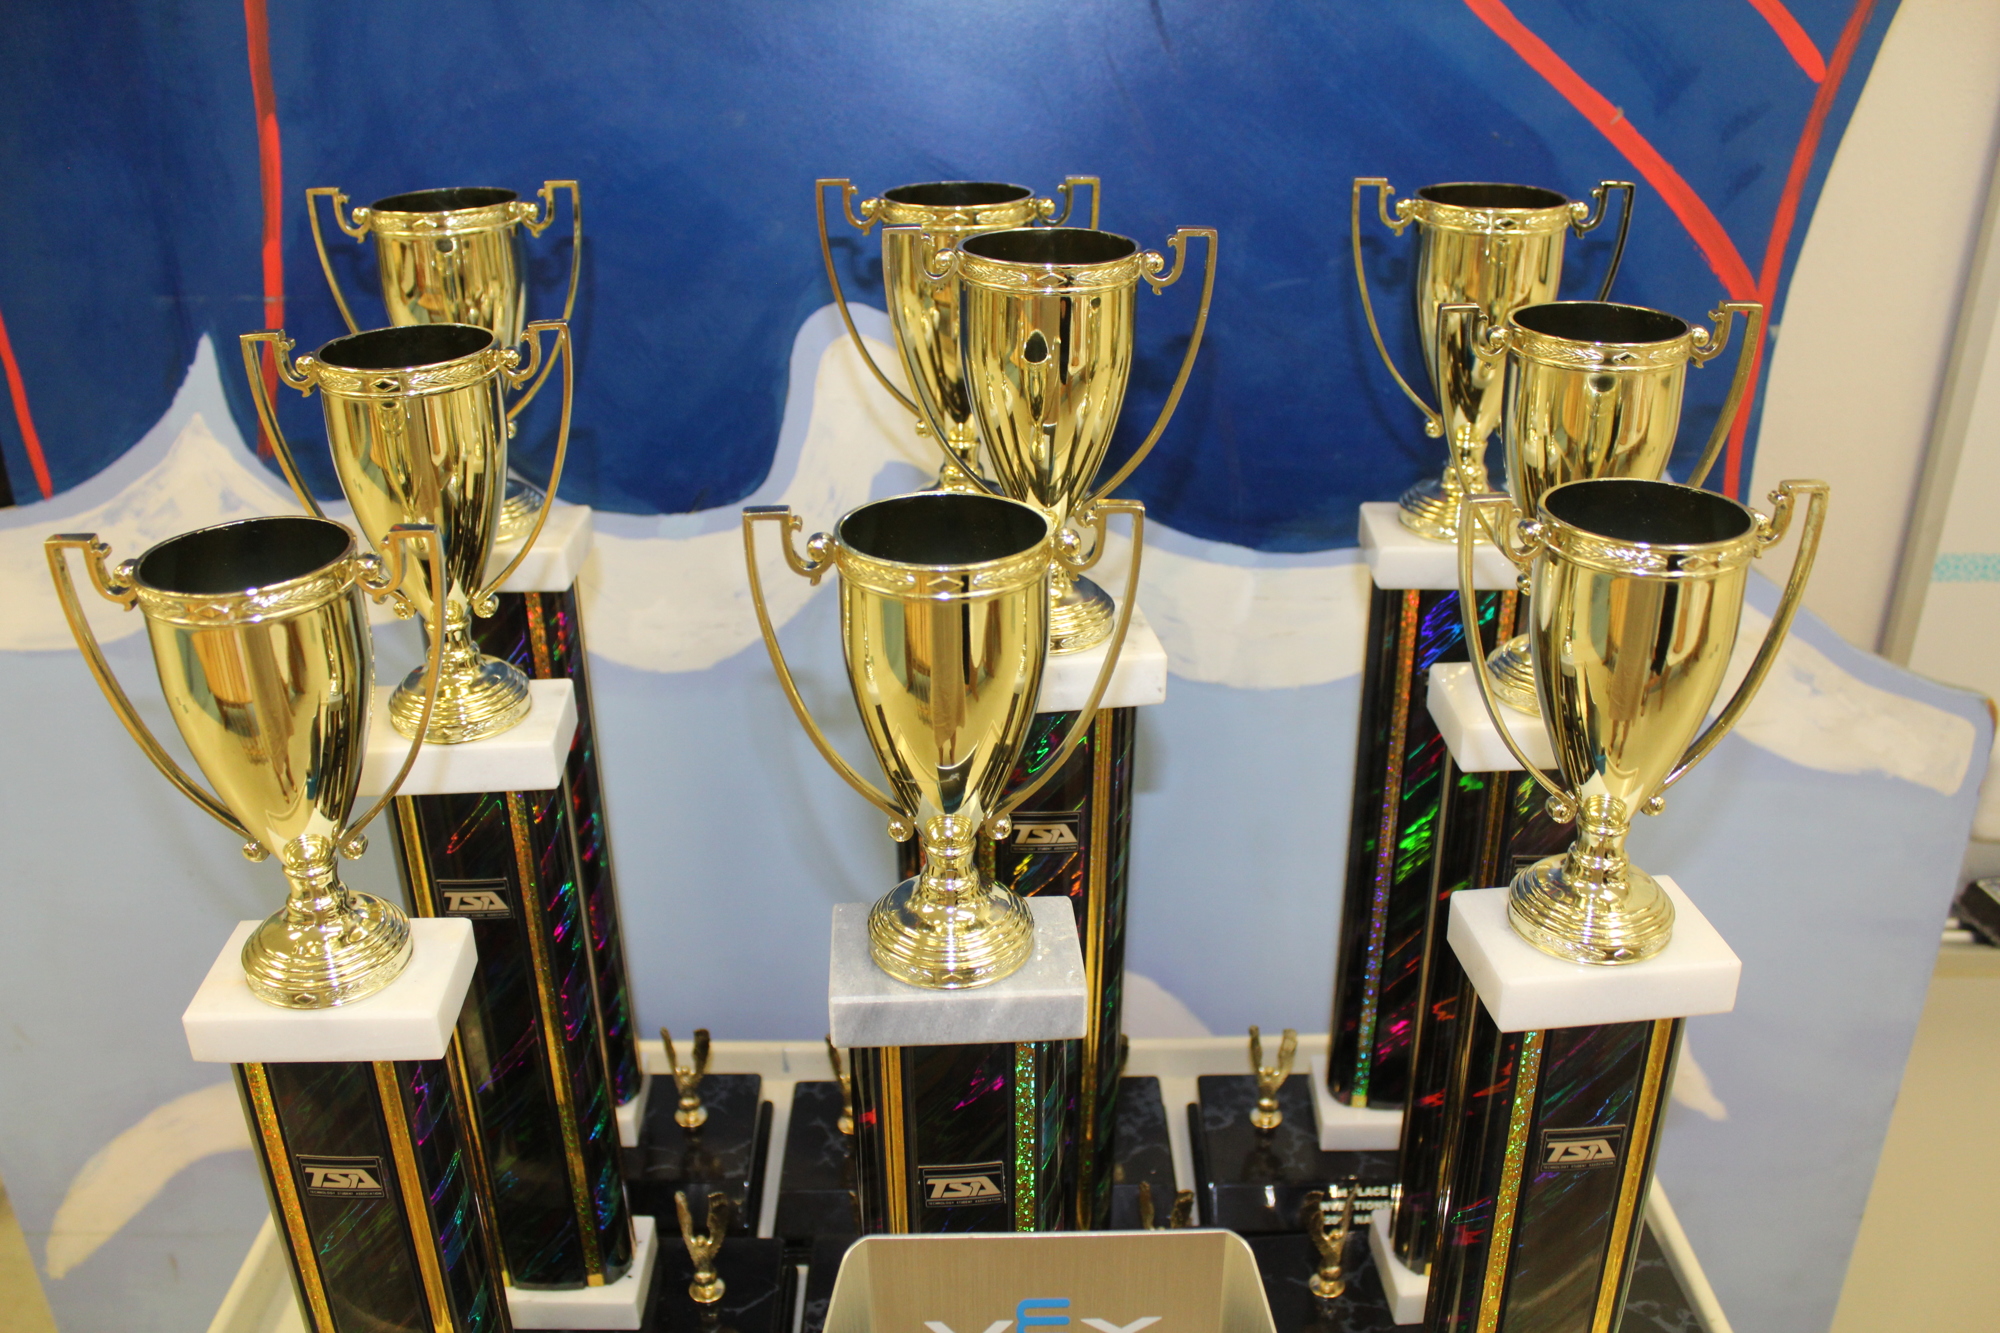 Trophies from the 2017 National TSA Conference sit lined up in Carlos E. Haile Middle School's TSA lab.